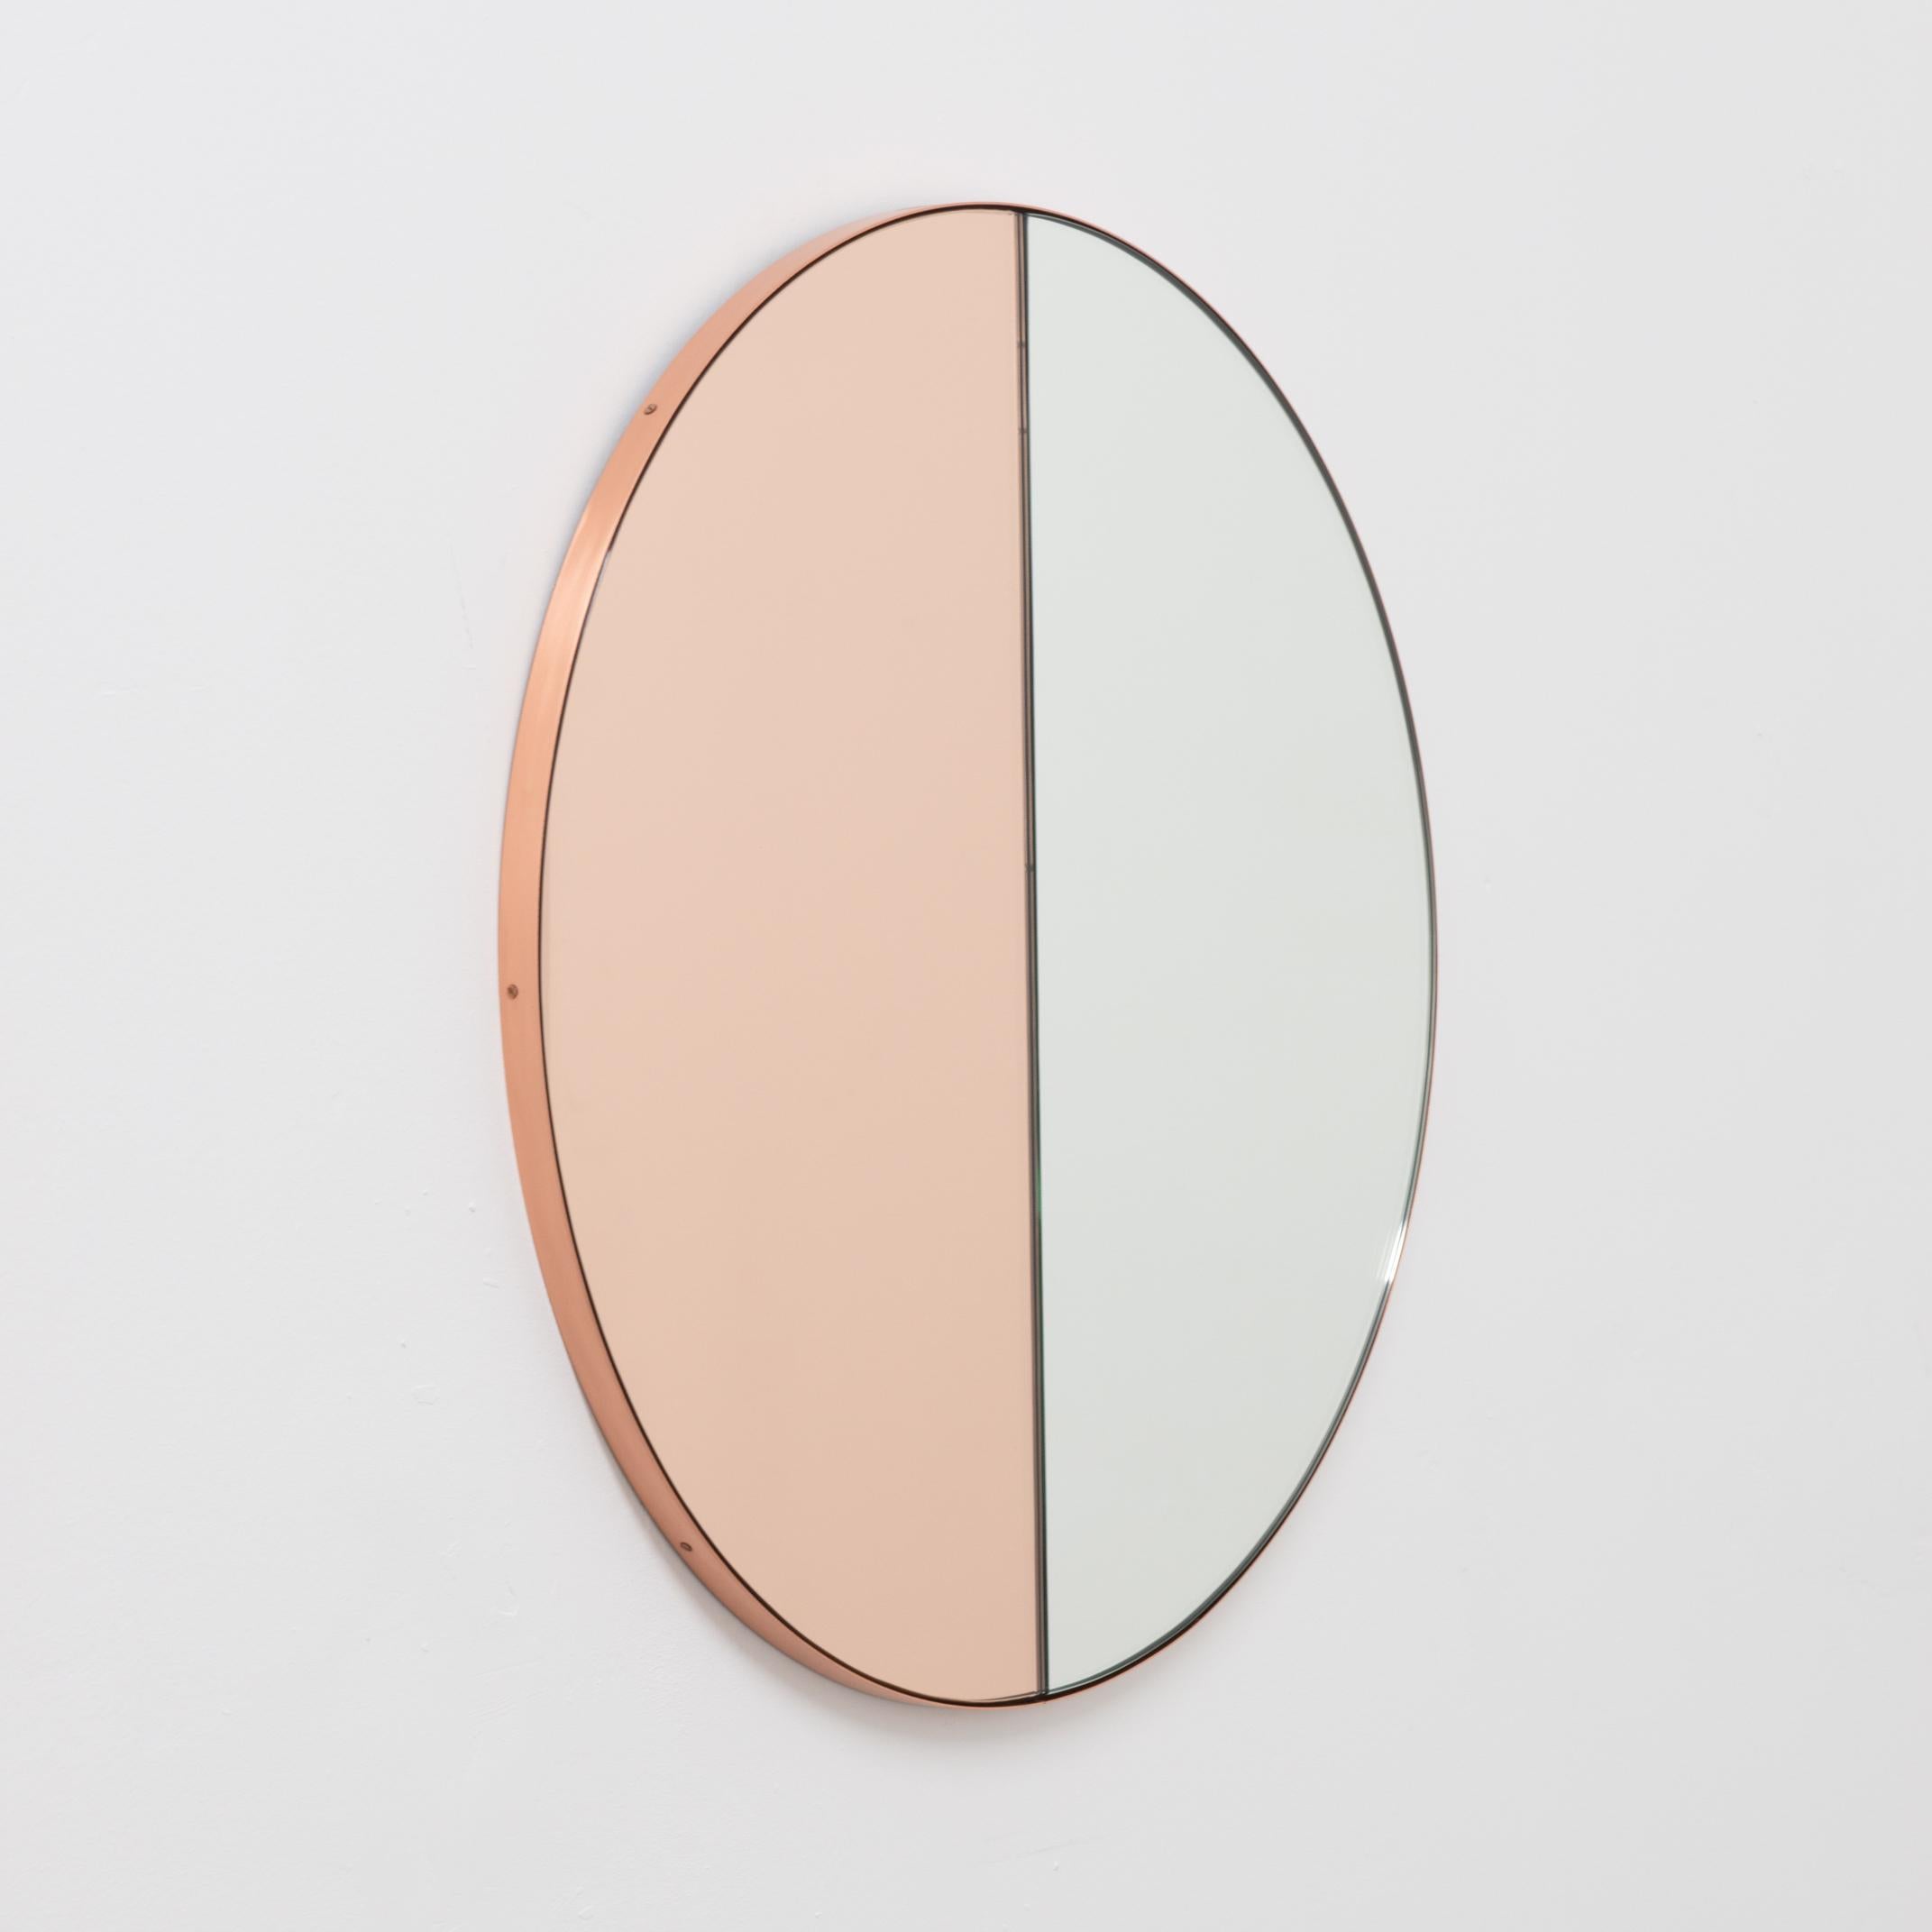 

The images in this bespoke listing do not represent the approved modifications, and they refer to a standard size of the Orbis Dualis Mixed Rose Gold and Silver Round Mirror with a Copper Frame, Large. All specifications for this particular